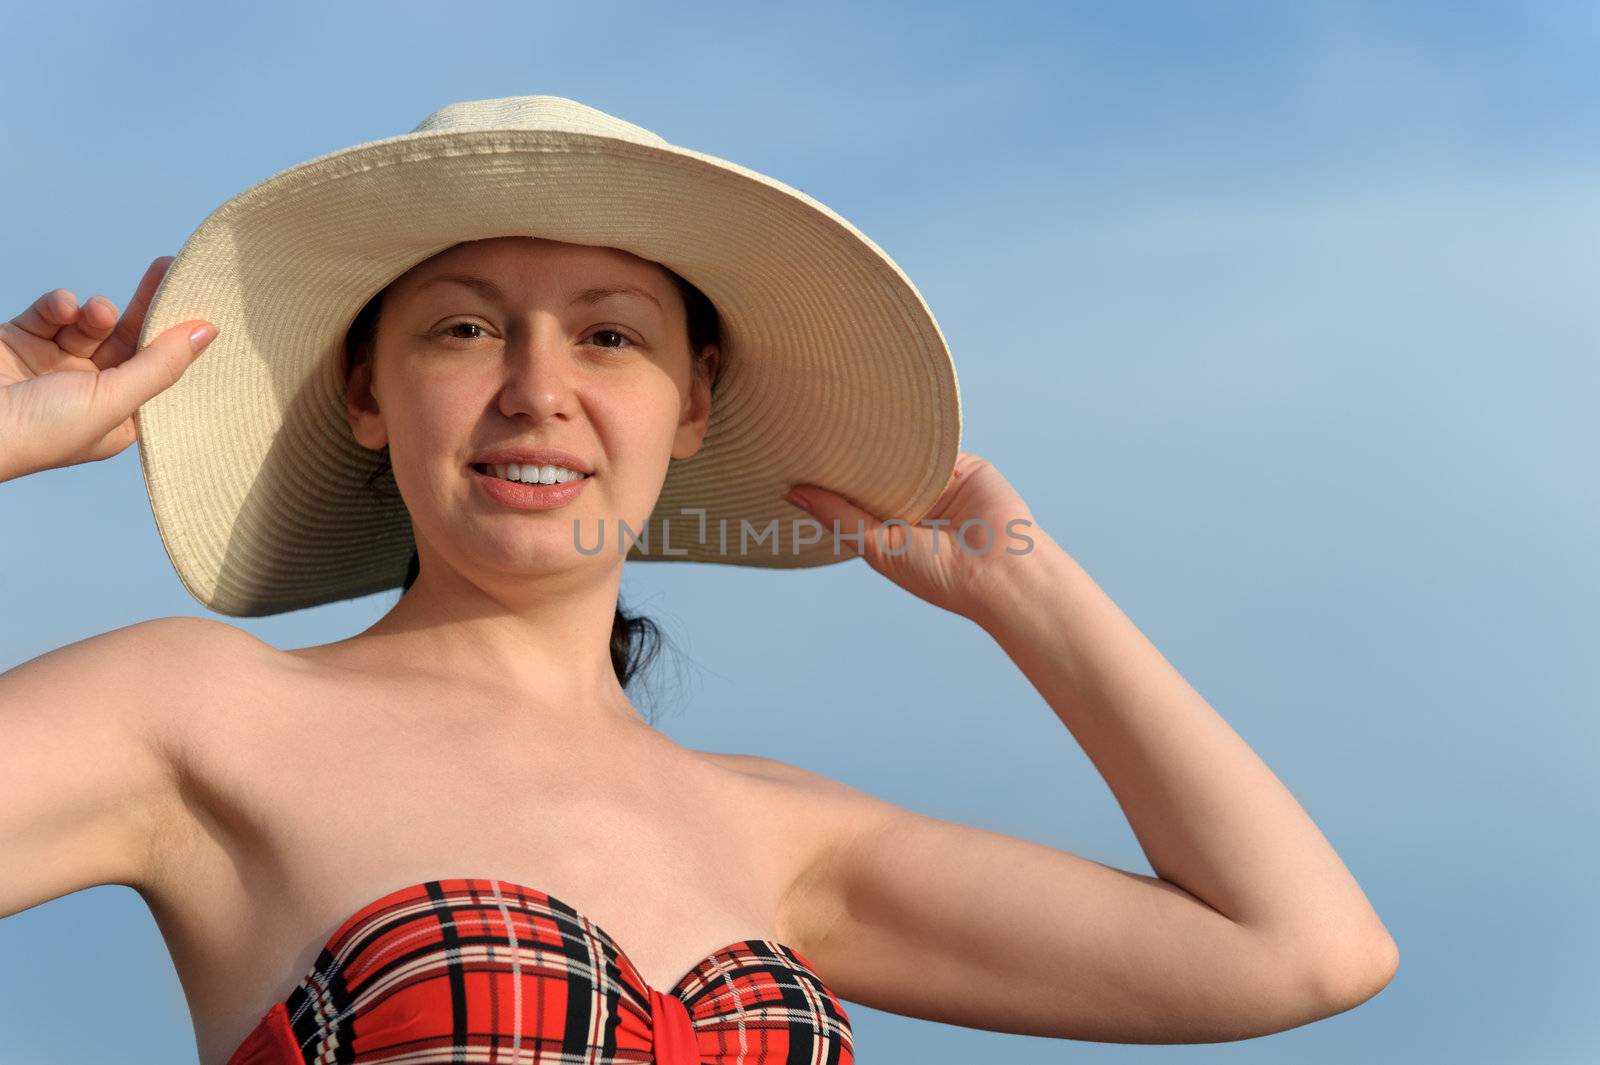 The girl in a hat against the blue sky